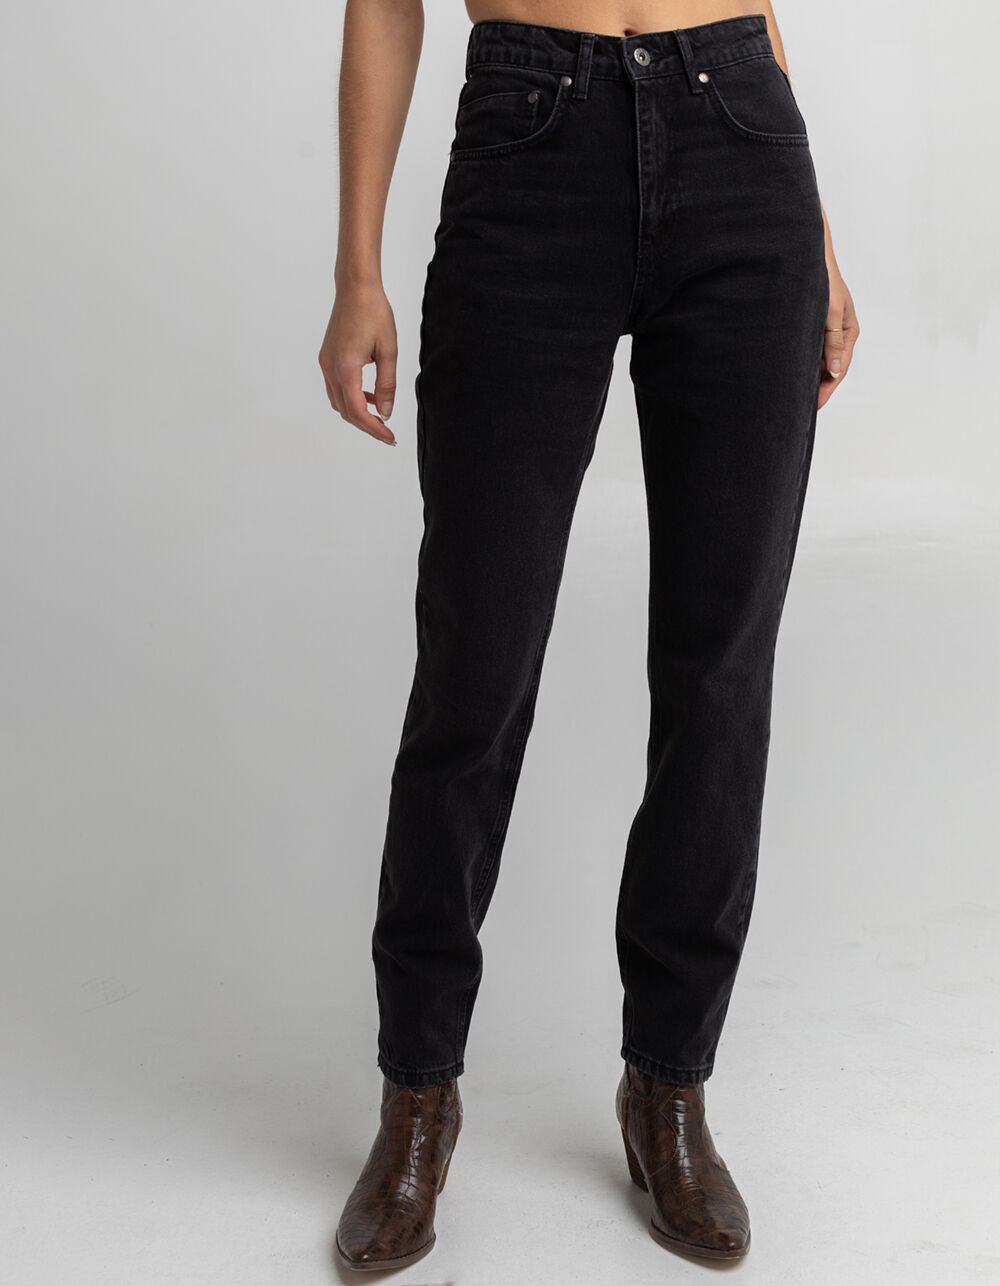 THE RAGGED PRIEST Cougar Mom Womens Jeans - WSHBK | Tillys